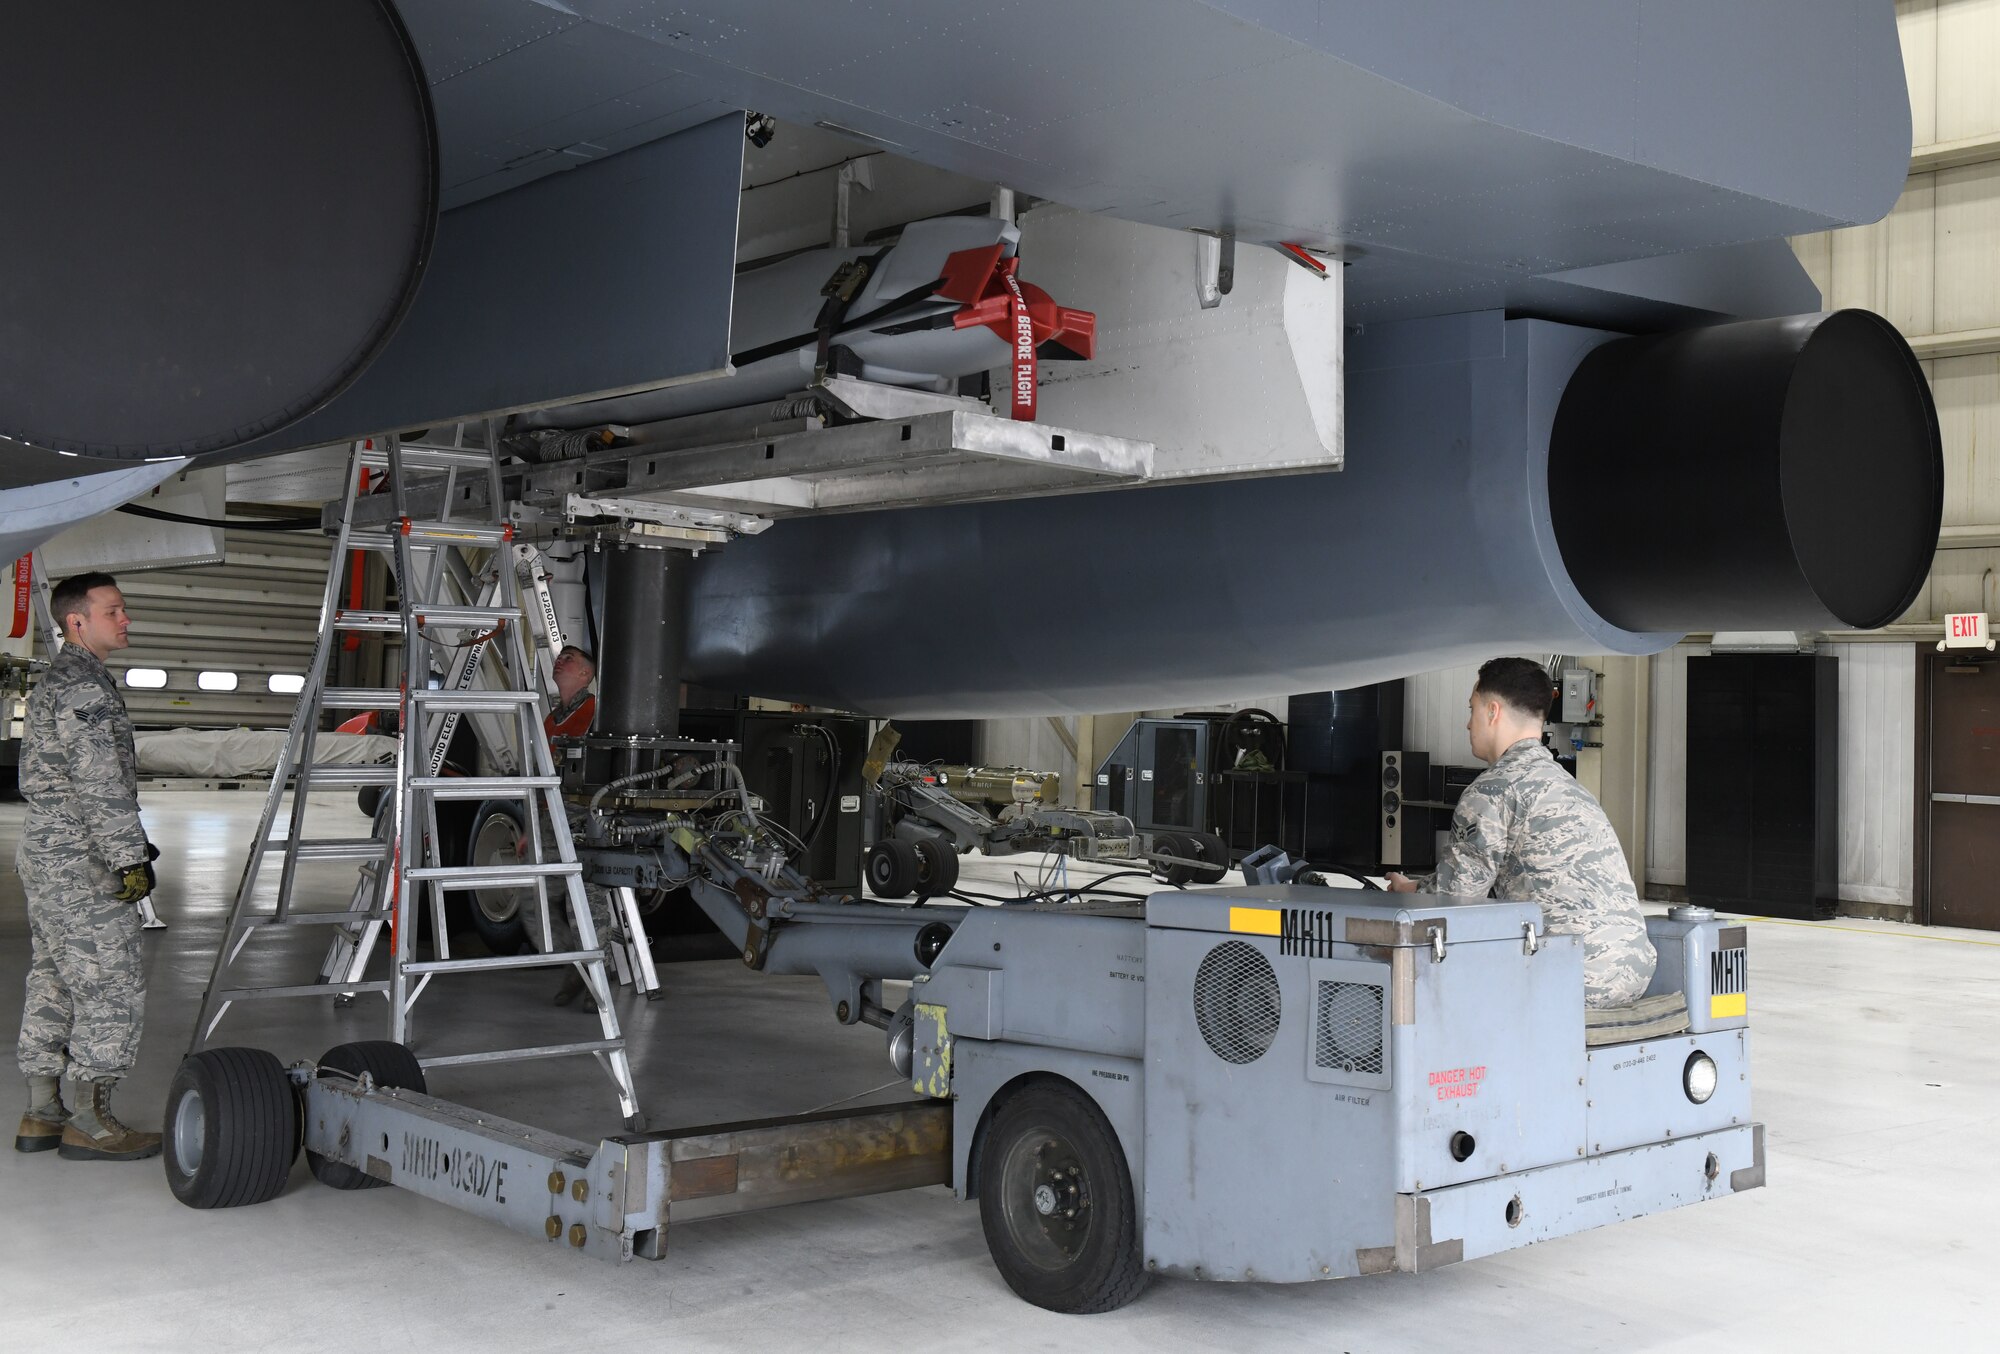 Load crew members from the 34th Aircraft Maintenance Unit use a munition truck or ‘jammer’, to load an inert AGM-158 Joint Air-to-Surface Standoff Missile into a simulated B-1 Bomber at the annual weapons load competition at Ellsworth Air Force Base, S.D., Jan.7, 2019. Squadron leadership selected weapons loaders to represent each unit as the best load crew of 2018. (U.S. Air Force photo by Airman 1st Class Christina Bennett)